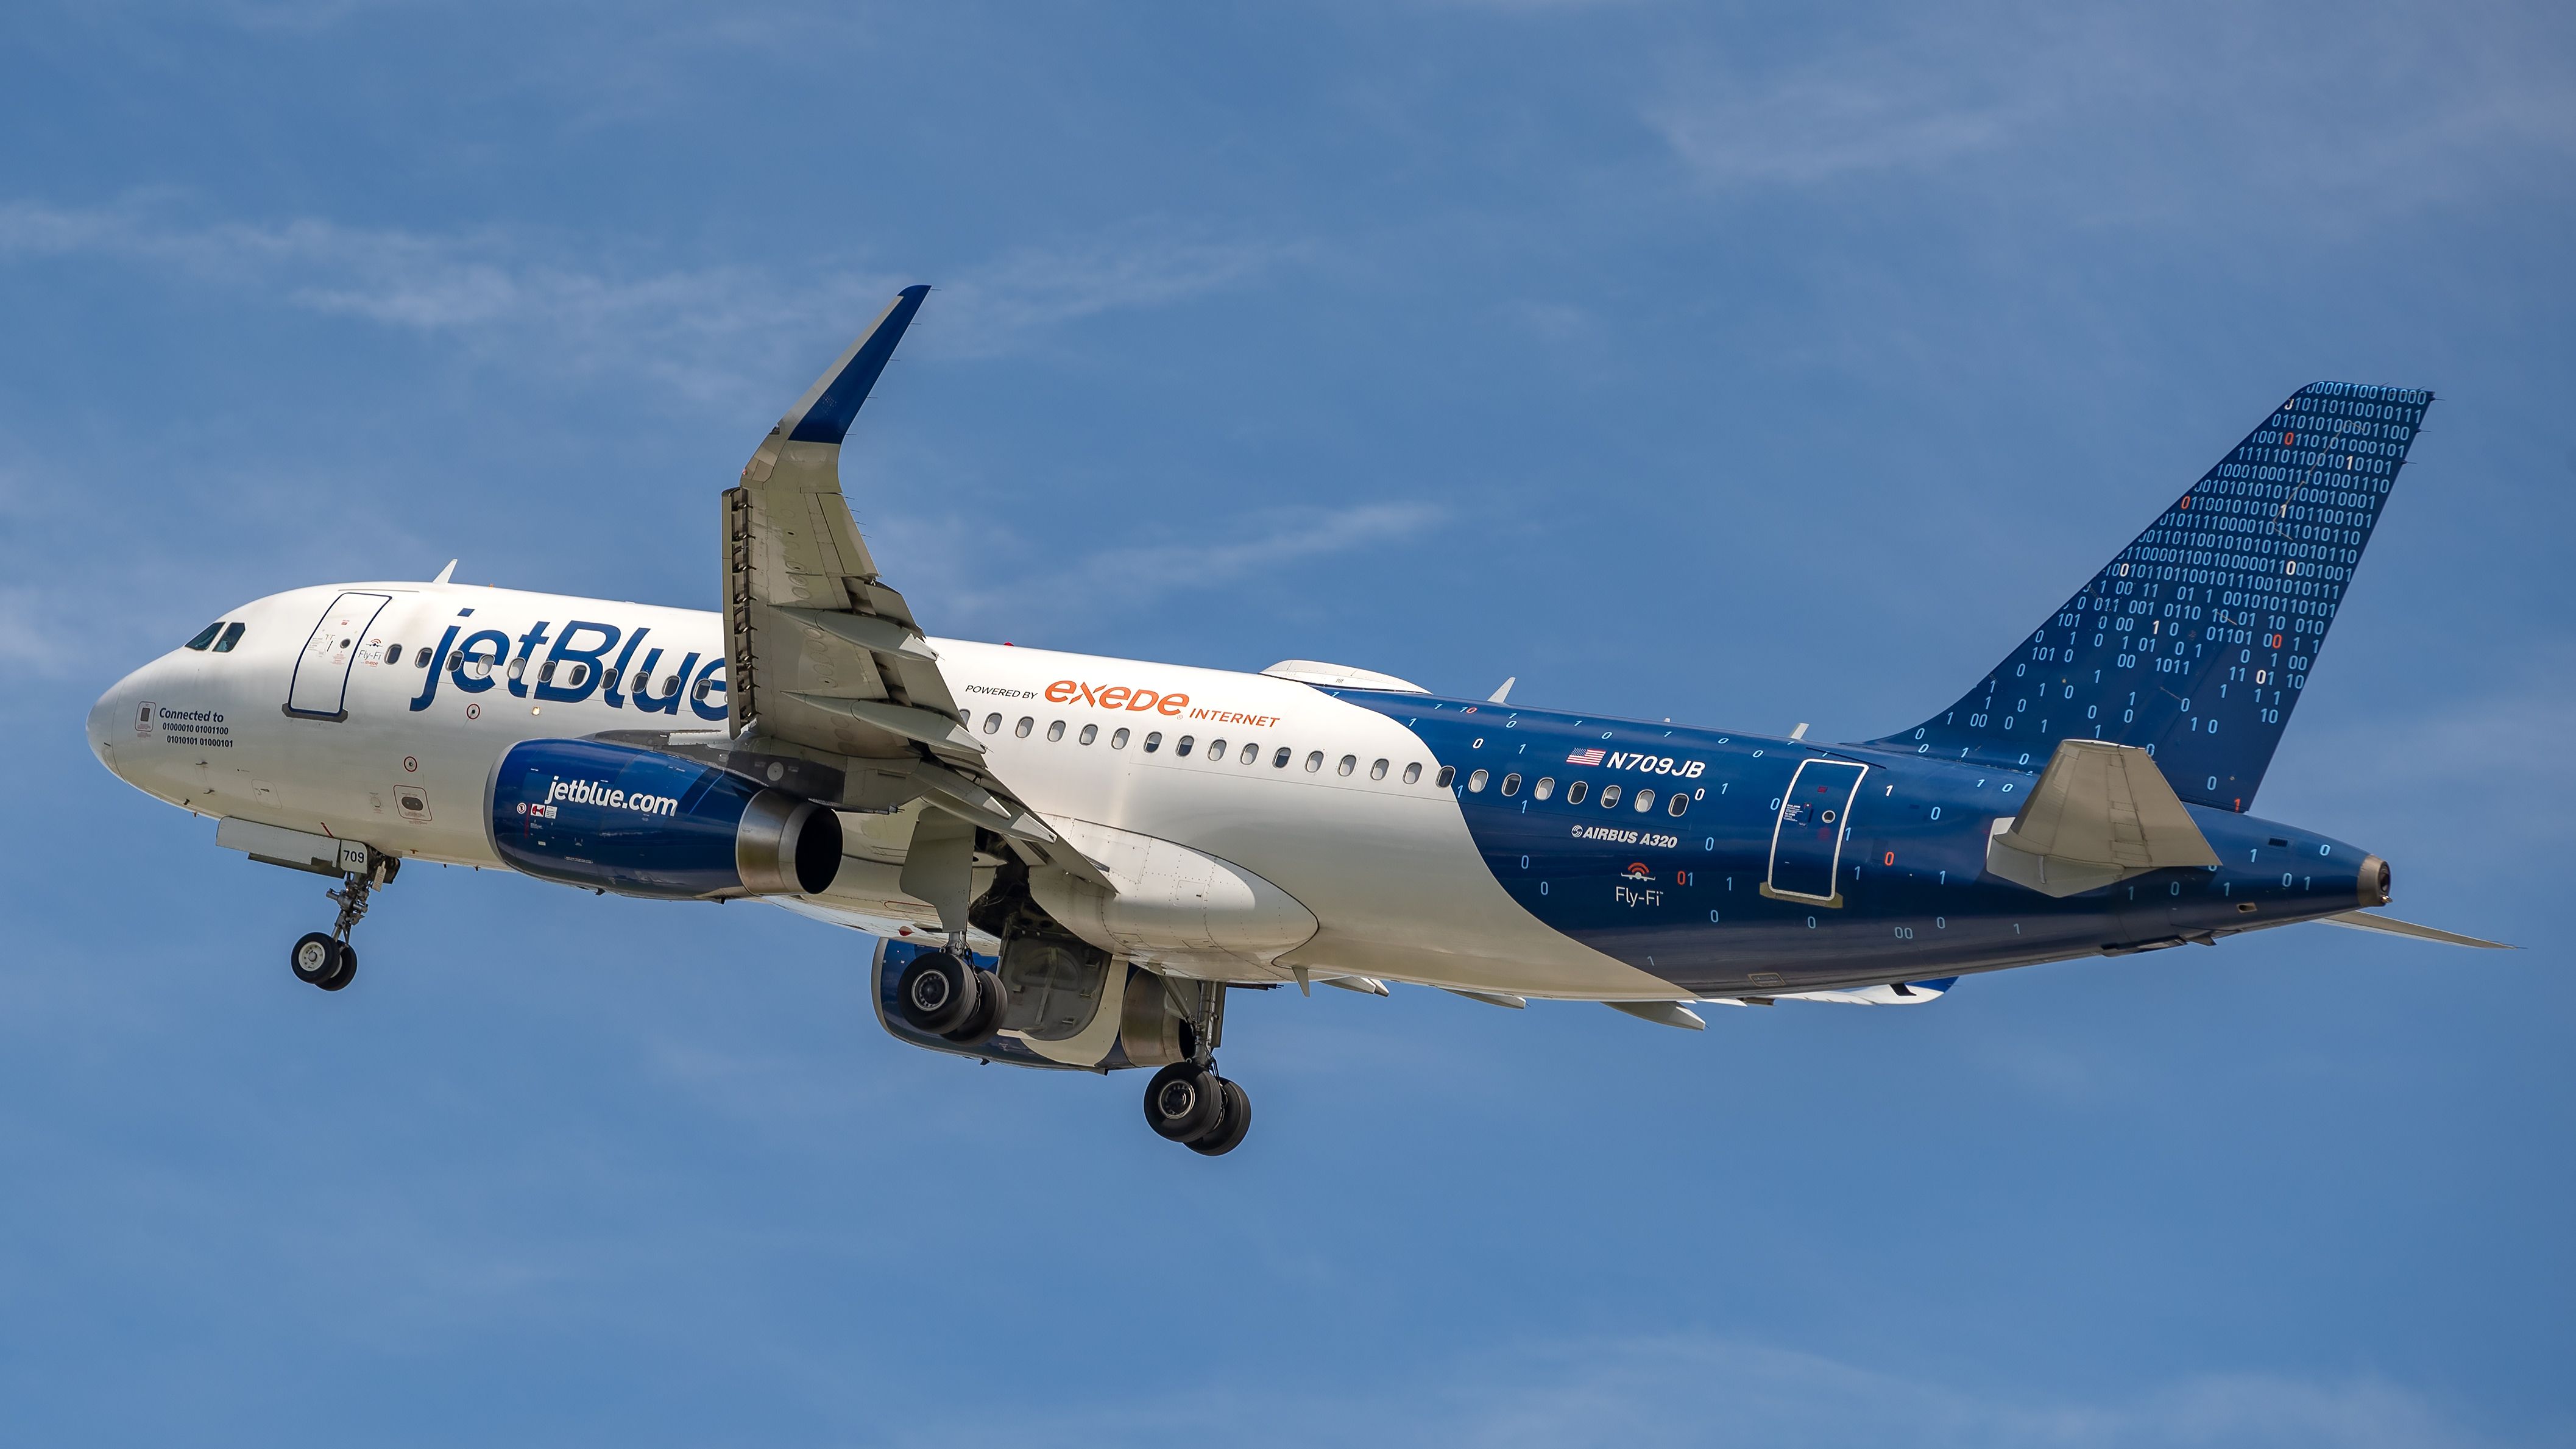 Airbus A320 (N709JB) - Jetblue A320 Binary livery taking off from runway 28L at KFLL